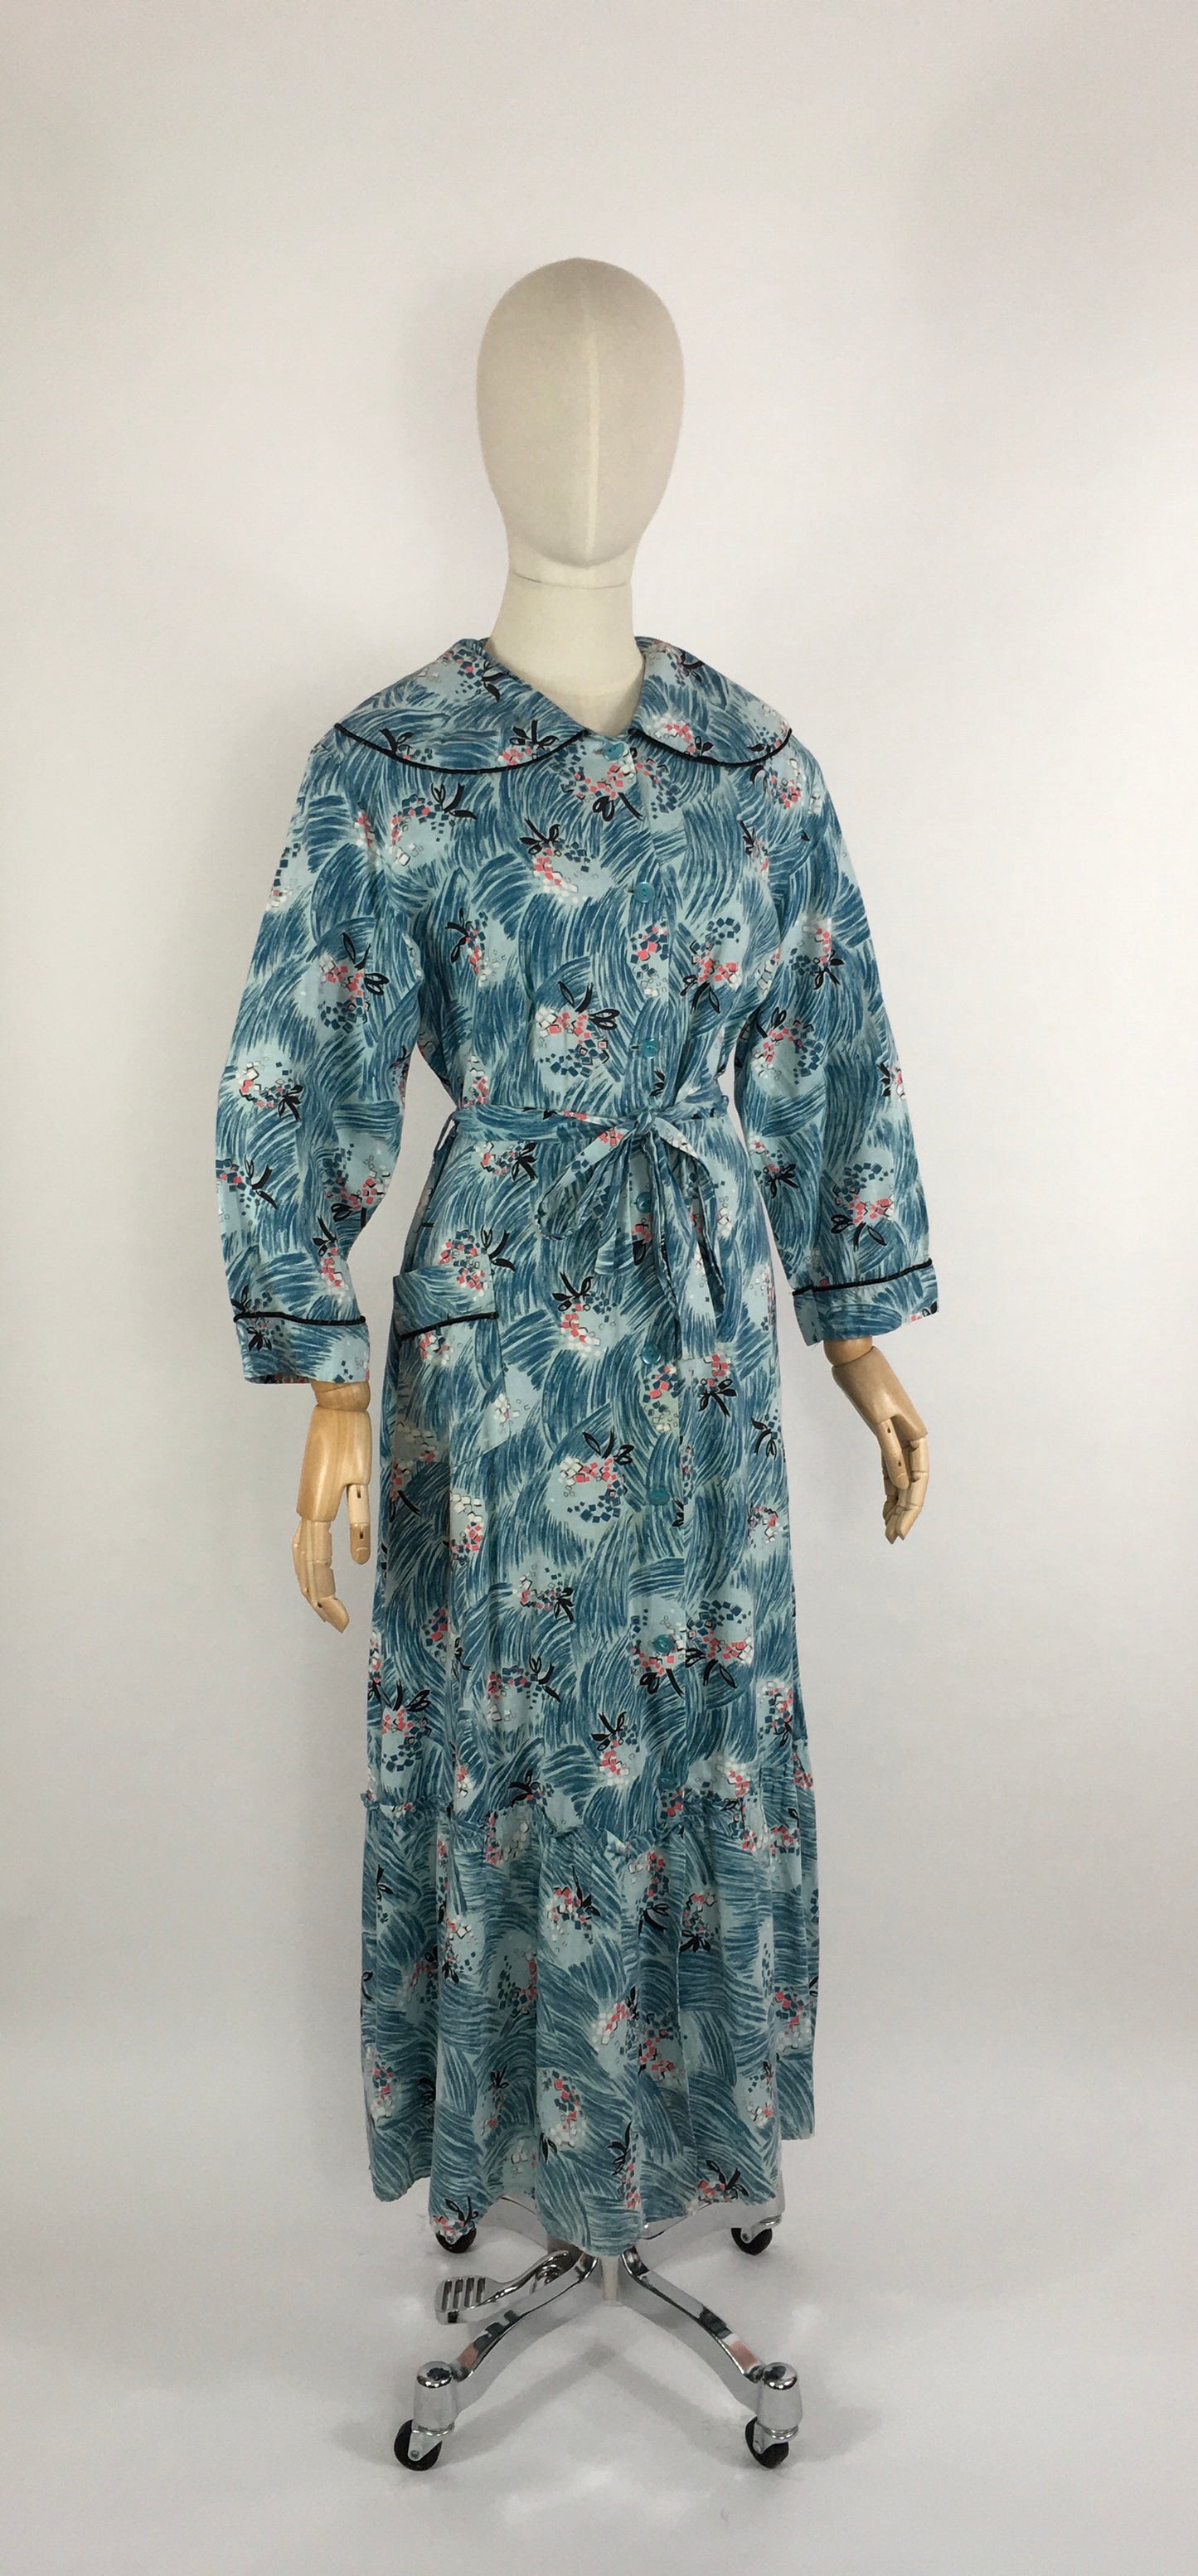 Original 1950s Housecoat by ‘ Pelaw ‘ - Made From a Beautiful Cotton In Blues, Pinks, Yellows and Blacks